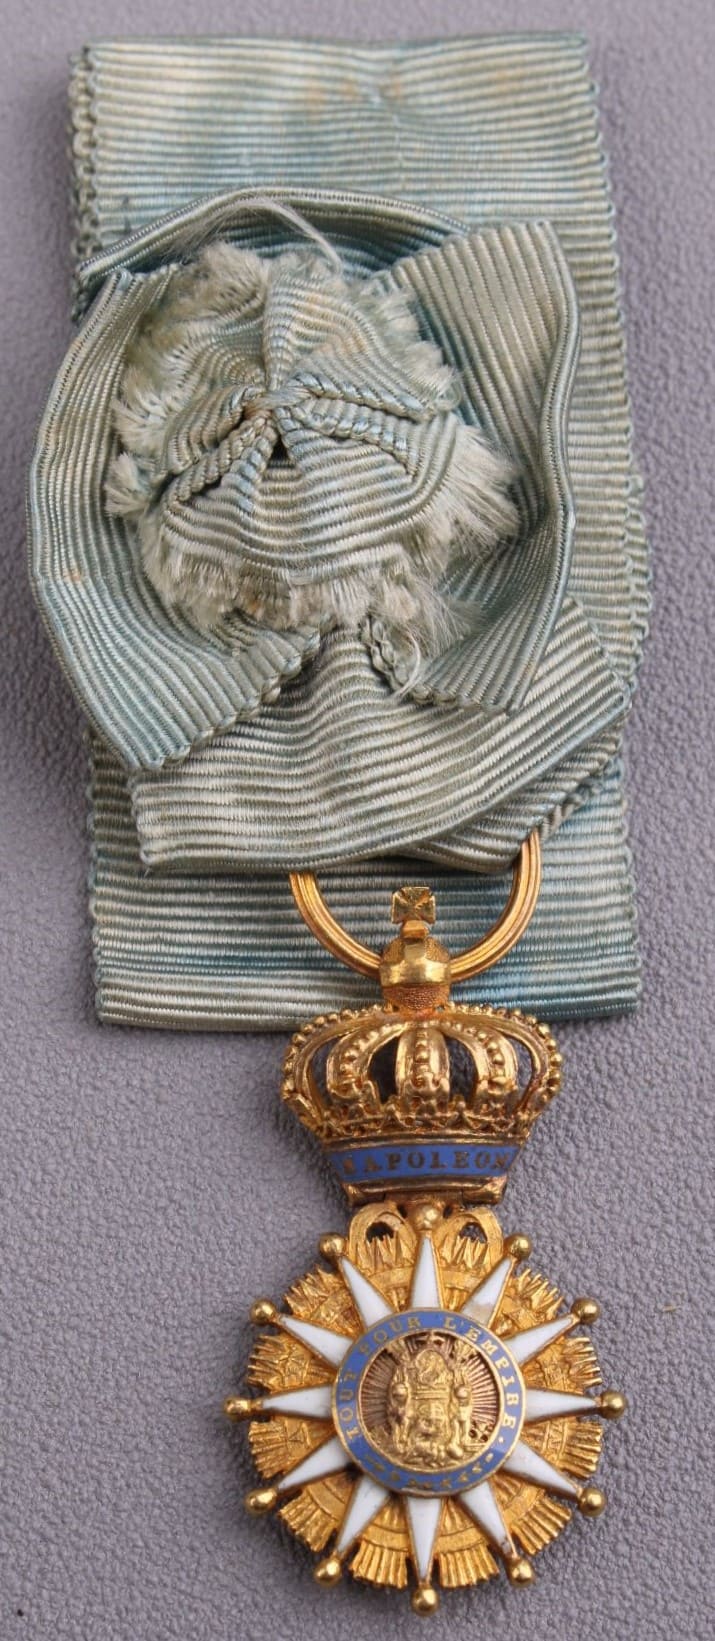 Reduced knight's star of the Order of the Reunion.jpg